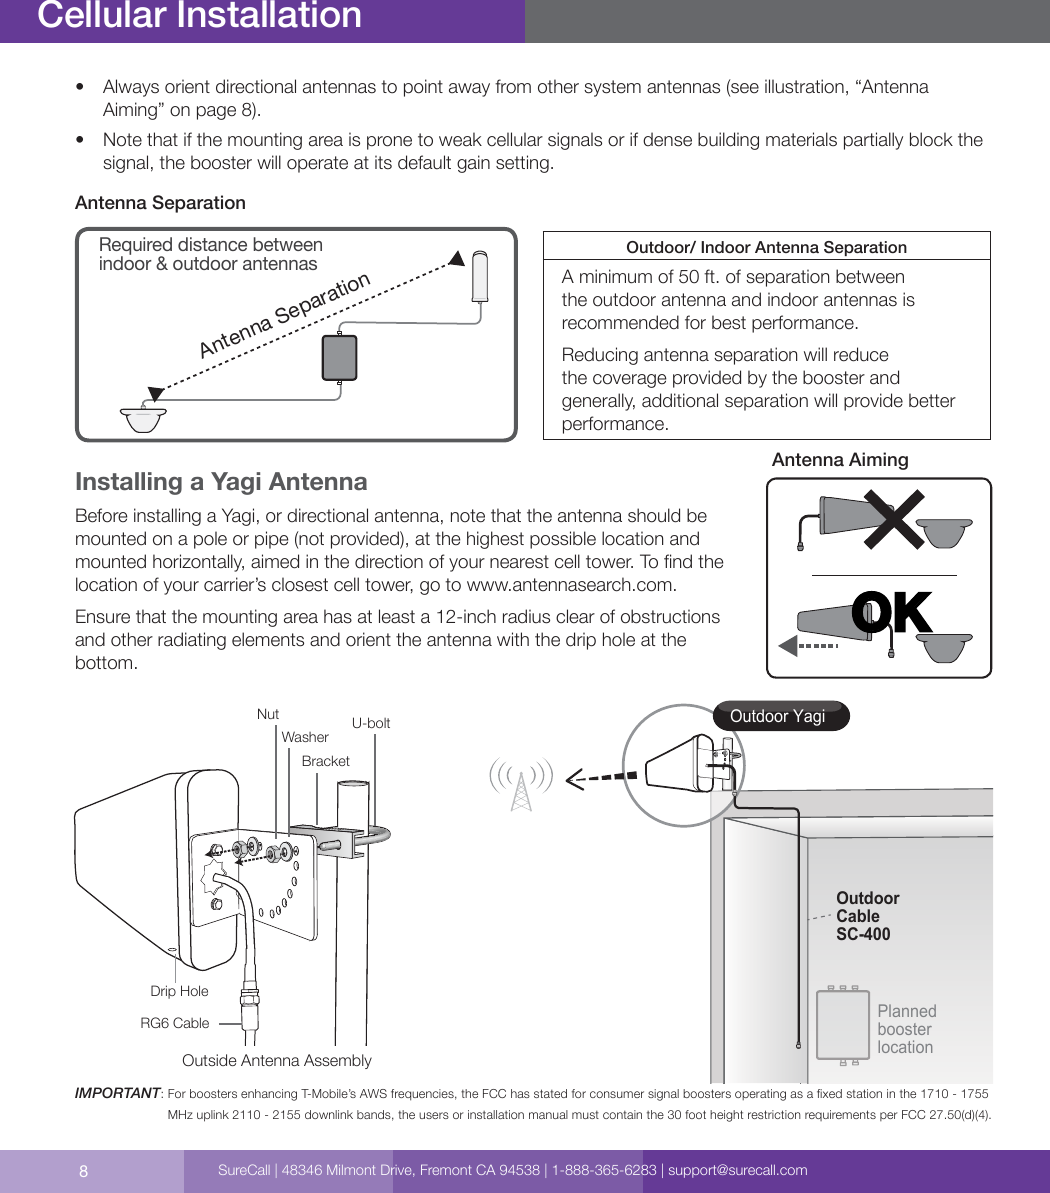 8Cellular Installation•  Always orient directional antennas to point away from other system antennas (see illustration, “Antenna Aiming” on page 8).•  Note that if the mounting area is prone to weak cellular signals or if dense building materials partially block the signal, the booster will operate at its default gain setting.Antenna SeparationAntenna SeparationRequired distance between indoor &amp; outdoor antennasOutdoor/ Indoor Antenna SeparationA minimum of 50 ft. of separation between the outdoor antenna and indoor antennas is recommended for best performance. Reducing antenna separation will reduce the coverage provided by the booster and generally, additional separation will provide better performance. Installing a Yagi AntennaBefore installing a Yagi, or directional antenna, note that the antenna should be mounted on a pole or pipe (not provided), at the highest possible location and mounted horizontally, aimed in the direction of your nearest cell tower. To nd the location of your carrier’s closest cell tower, go to www.antennasearch.com. Ensure that the mounting area has at least a 12-inch radius clear of obstructions and other radiating elements and orient the antenna with the drip hole at the bottom. IMPORTANT:  For boosters enhancing T-Mobile’s AWS frequencies, the FCC has stated for consumer signal boosters operating as a xed station in the 1710 - 1755 MHz uplink 2110 - 2155 downlink bands, the users or installation manual must contain the 30 foot height restriction requirements per FCC 27.50(d)(4).OKAntenna AimingOutdoor YagiPlanned booster locationOutdoorCableSC-400Outside Antenna AssemblyNutWasher U-boltBracketDrip HoleRG6 CableSureCall | 48346 Milmont Drive, Fremont CA 94538 | 1-888-365-6283 | support@surecall.com